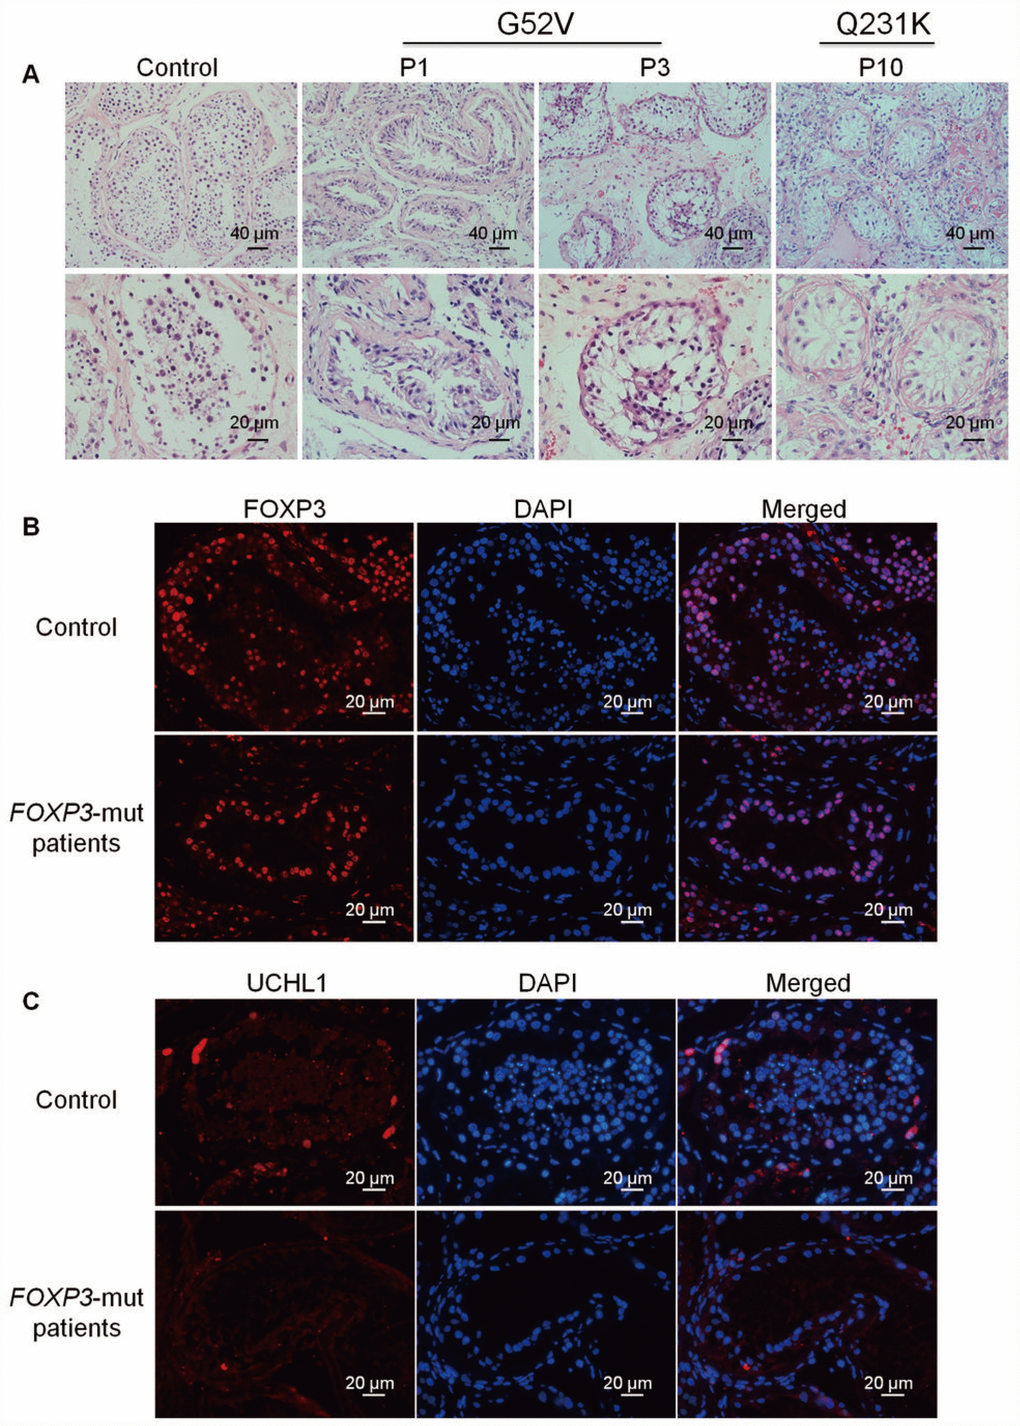 Morphology and phenotype of FOXP3-mut NOA patients and OA controls. (A) H&E staining revealed that seminiferous tubule diameter was reduced and spermatogenesis was arrested in FOXP3-mut NOA patients. Scale bars = 40 μm and 20 μm, respectively. (B-C) Immunohistochemical staining demonstrated the expression of FOXP3 protein (B) and UCHL1 protein (C) in FOXP3-mut NOA patients (low panels) and OA controls (upper panels). Experiments were repeated for at least three times. Scale bars = 20 μm.